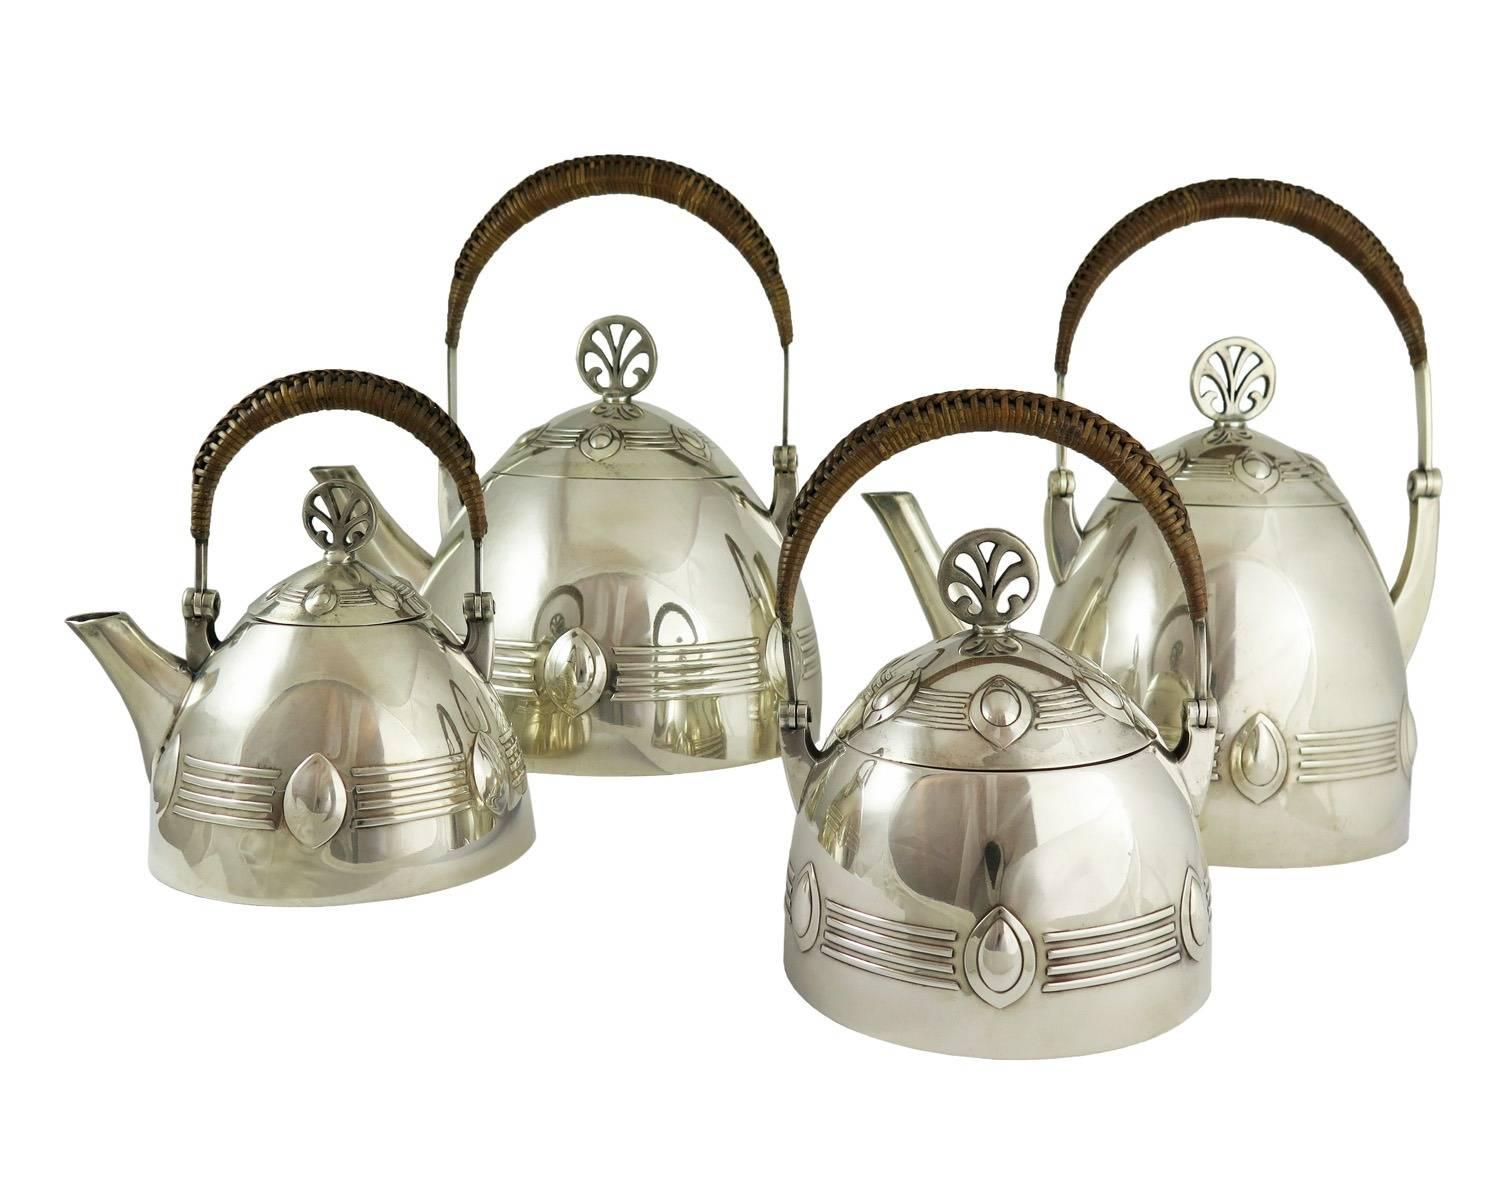 A whimsically refined Jugendstil German silver plate coffee and tea service with tray, designed by Albert Mayer for WMF and retailed by Casa Costa, Argentina.

The Art Nouveau set consists of a coffee pot, tea pot, sugar pot and cream pot, and tray.